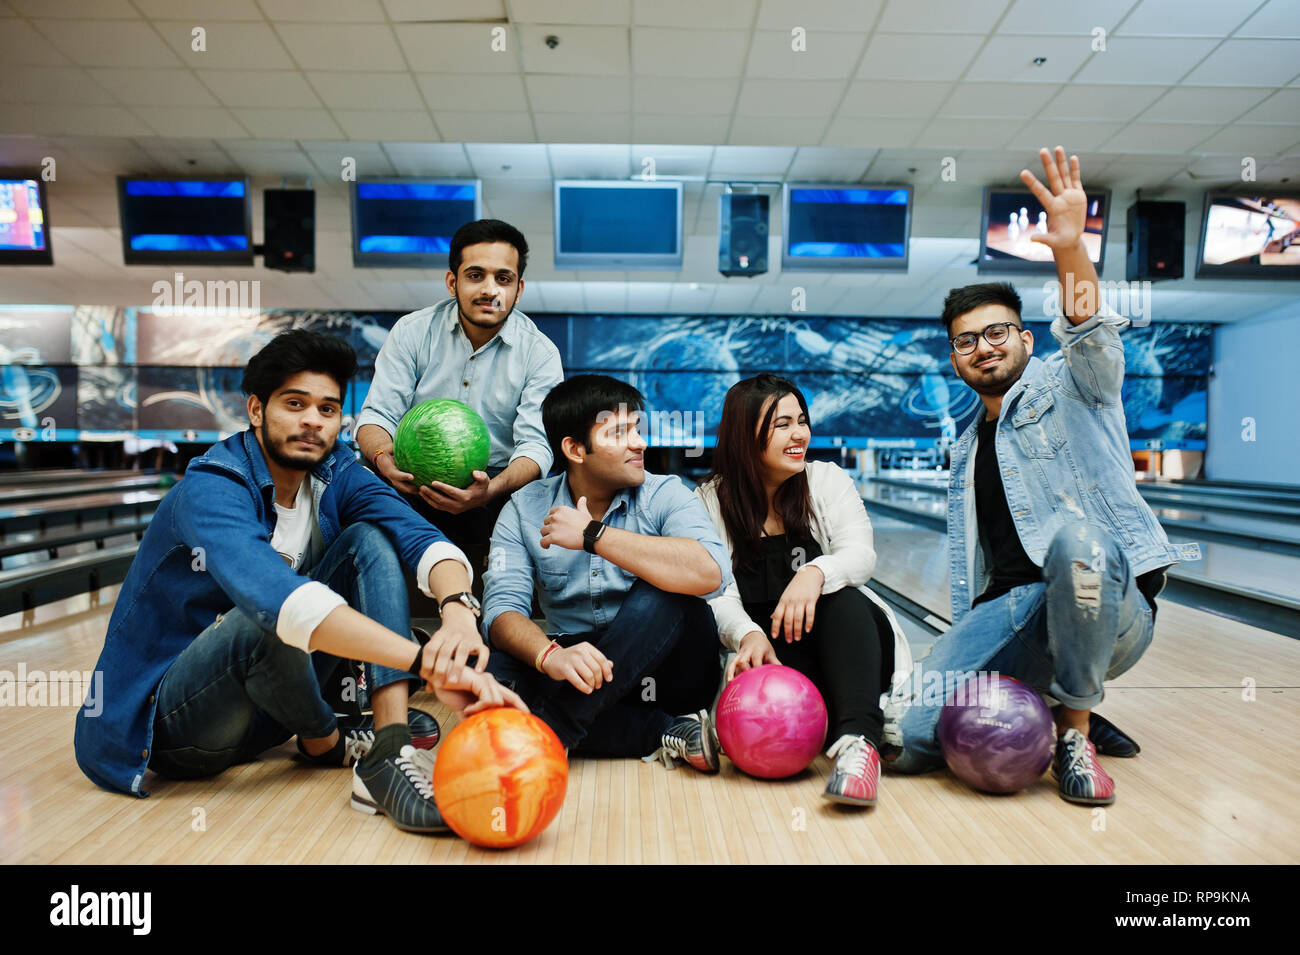 Group of five south asian peoples having rest and fun at bowling club, sitting on bowling alley with balls on hands. Stock Photo